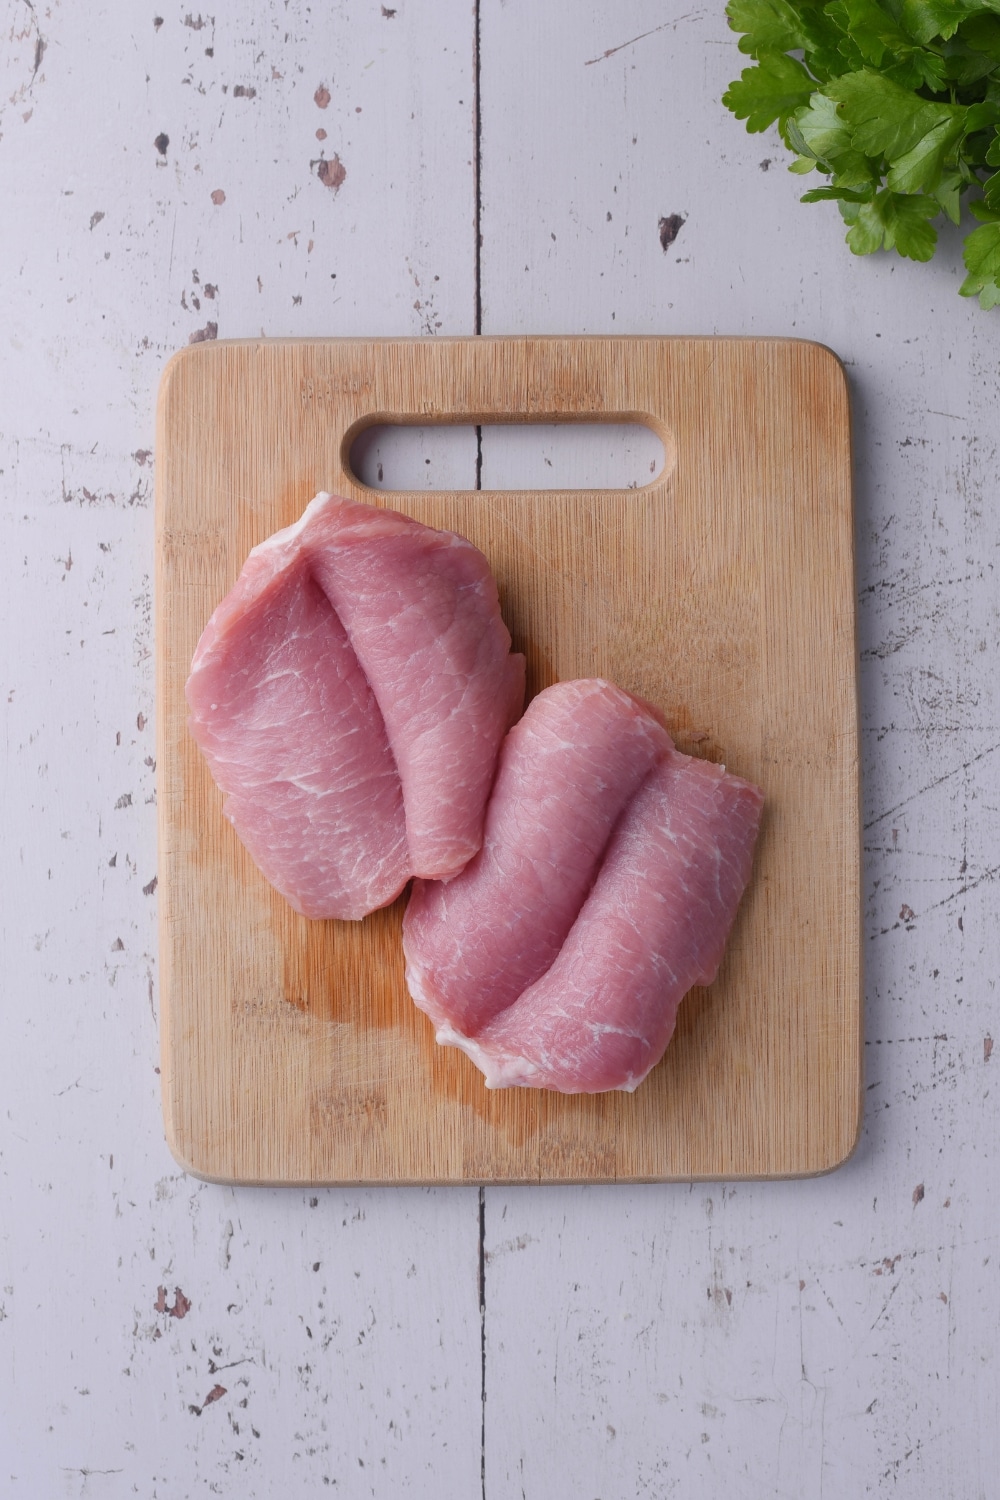 Raw pork chops sliced down the middle and opened on a wooden cutting board.